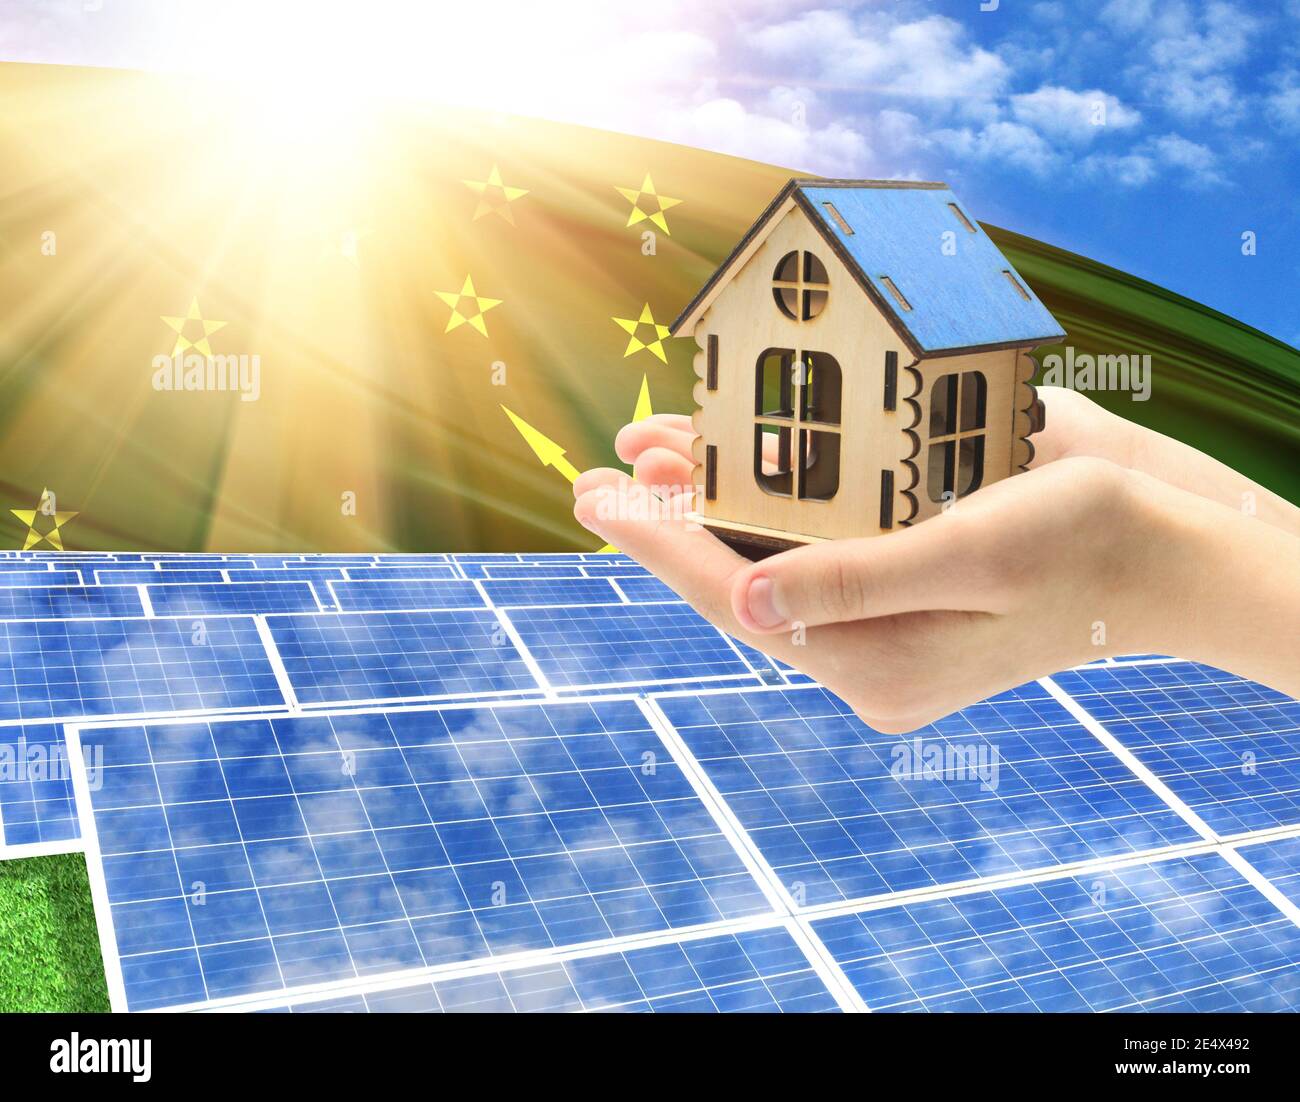 The photo with solar panels and a woman's palm holding a toy house shows the flag of Adygea in the sun. Stock Photo